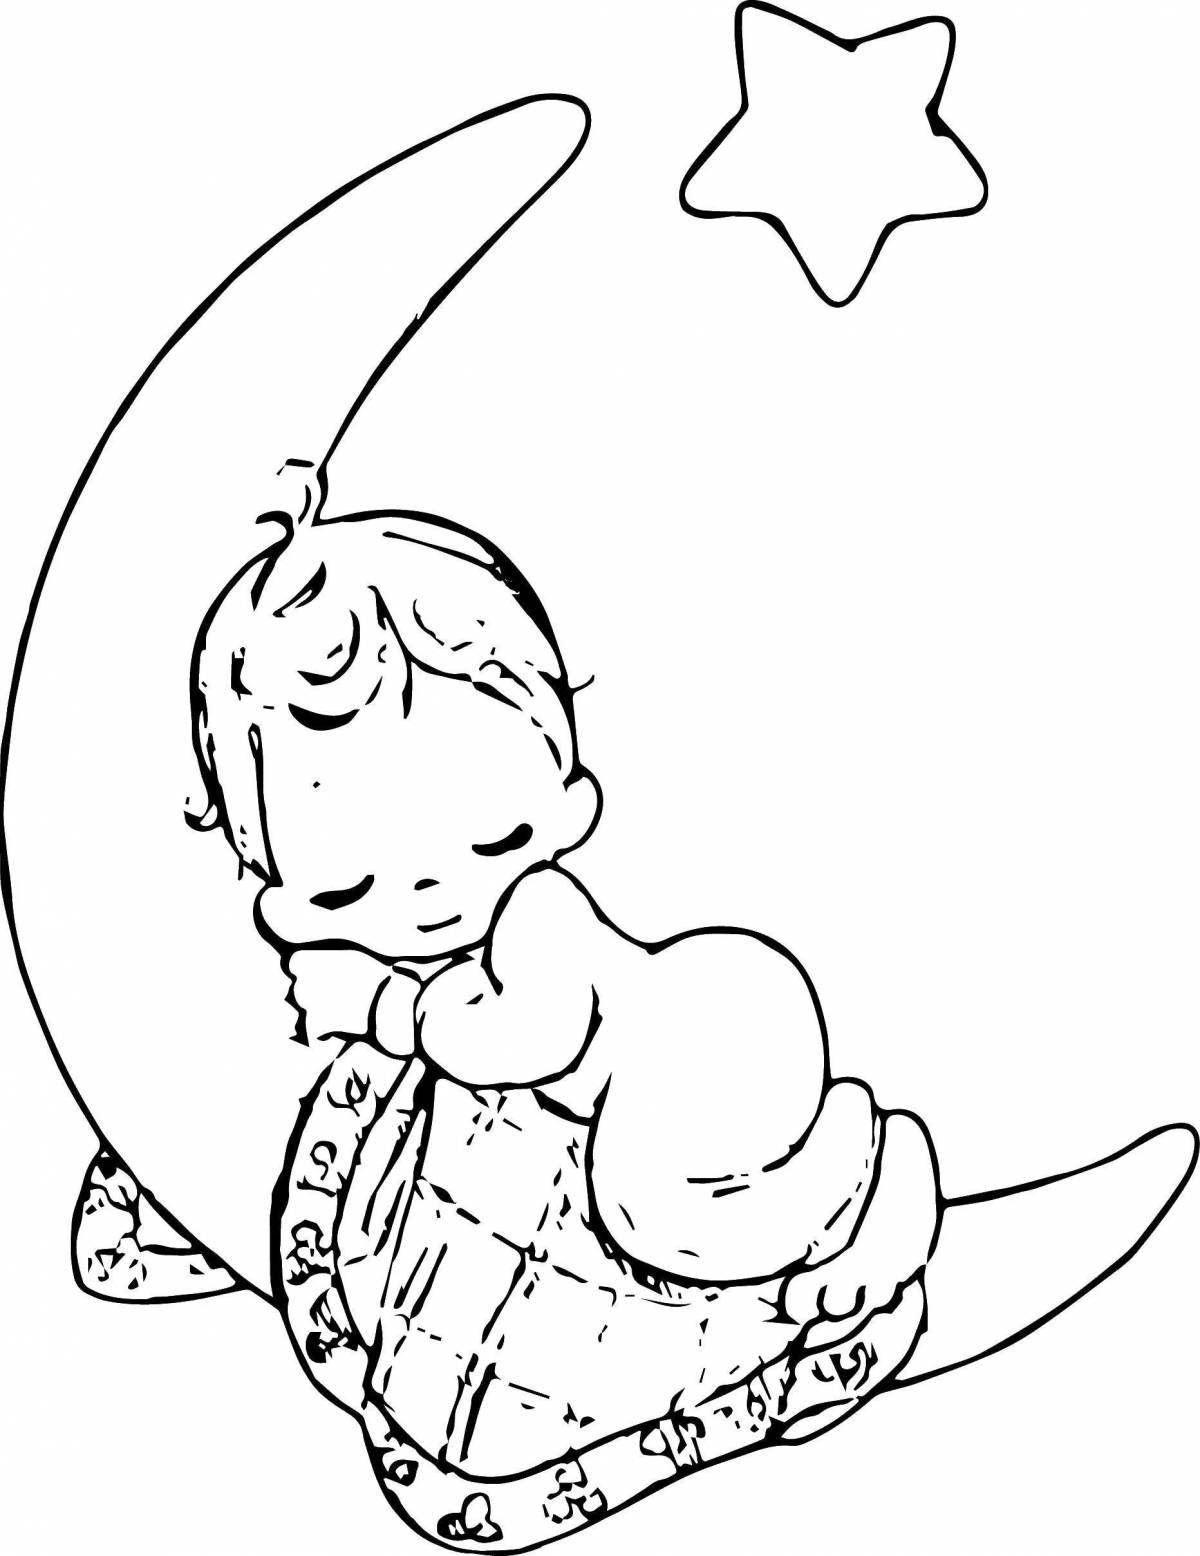 Coloring soft sleeping baby